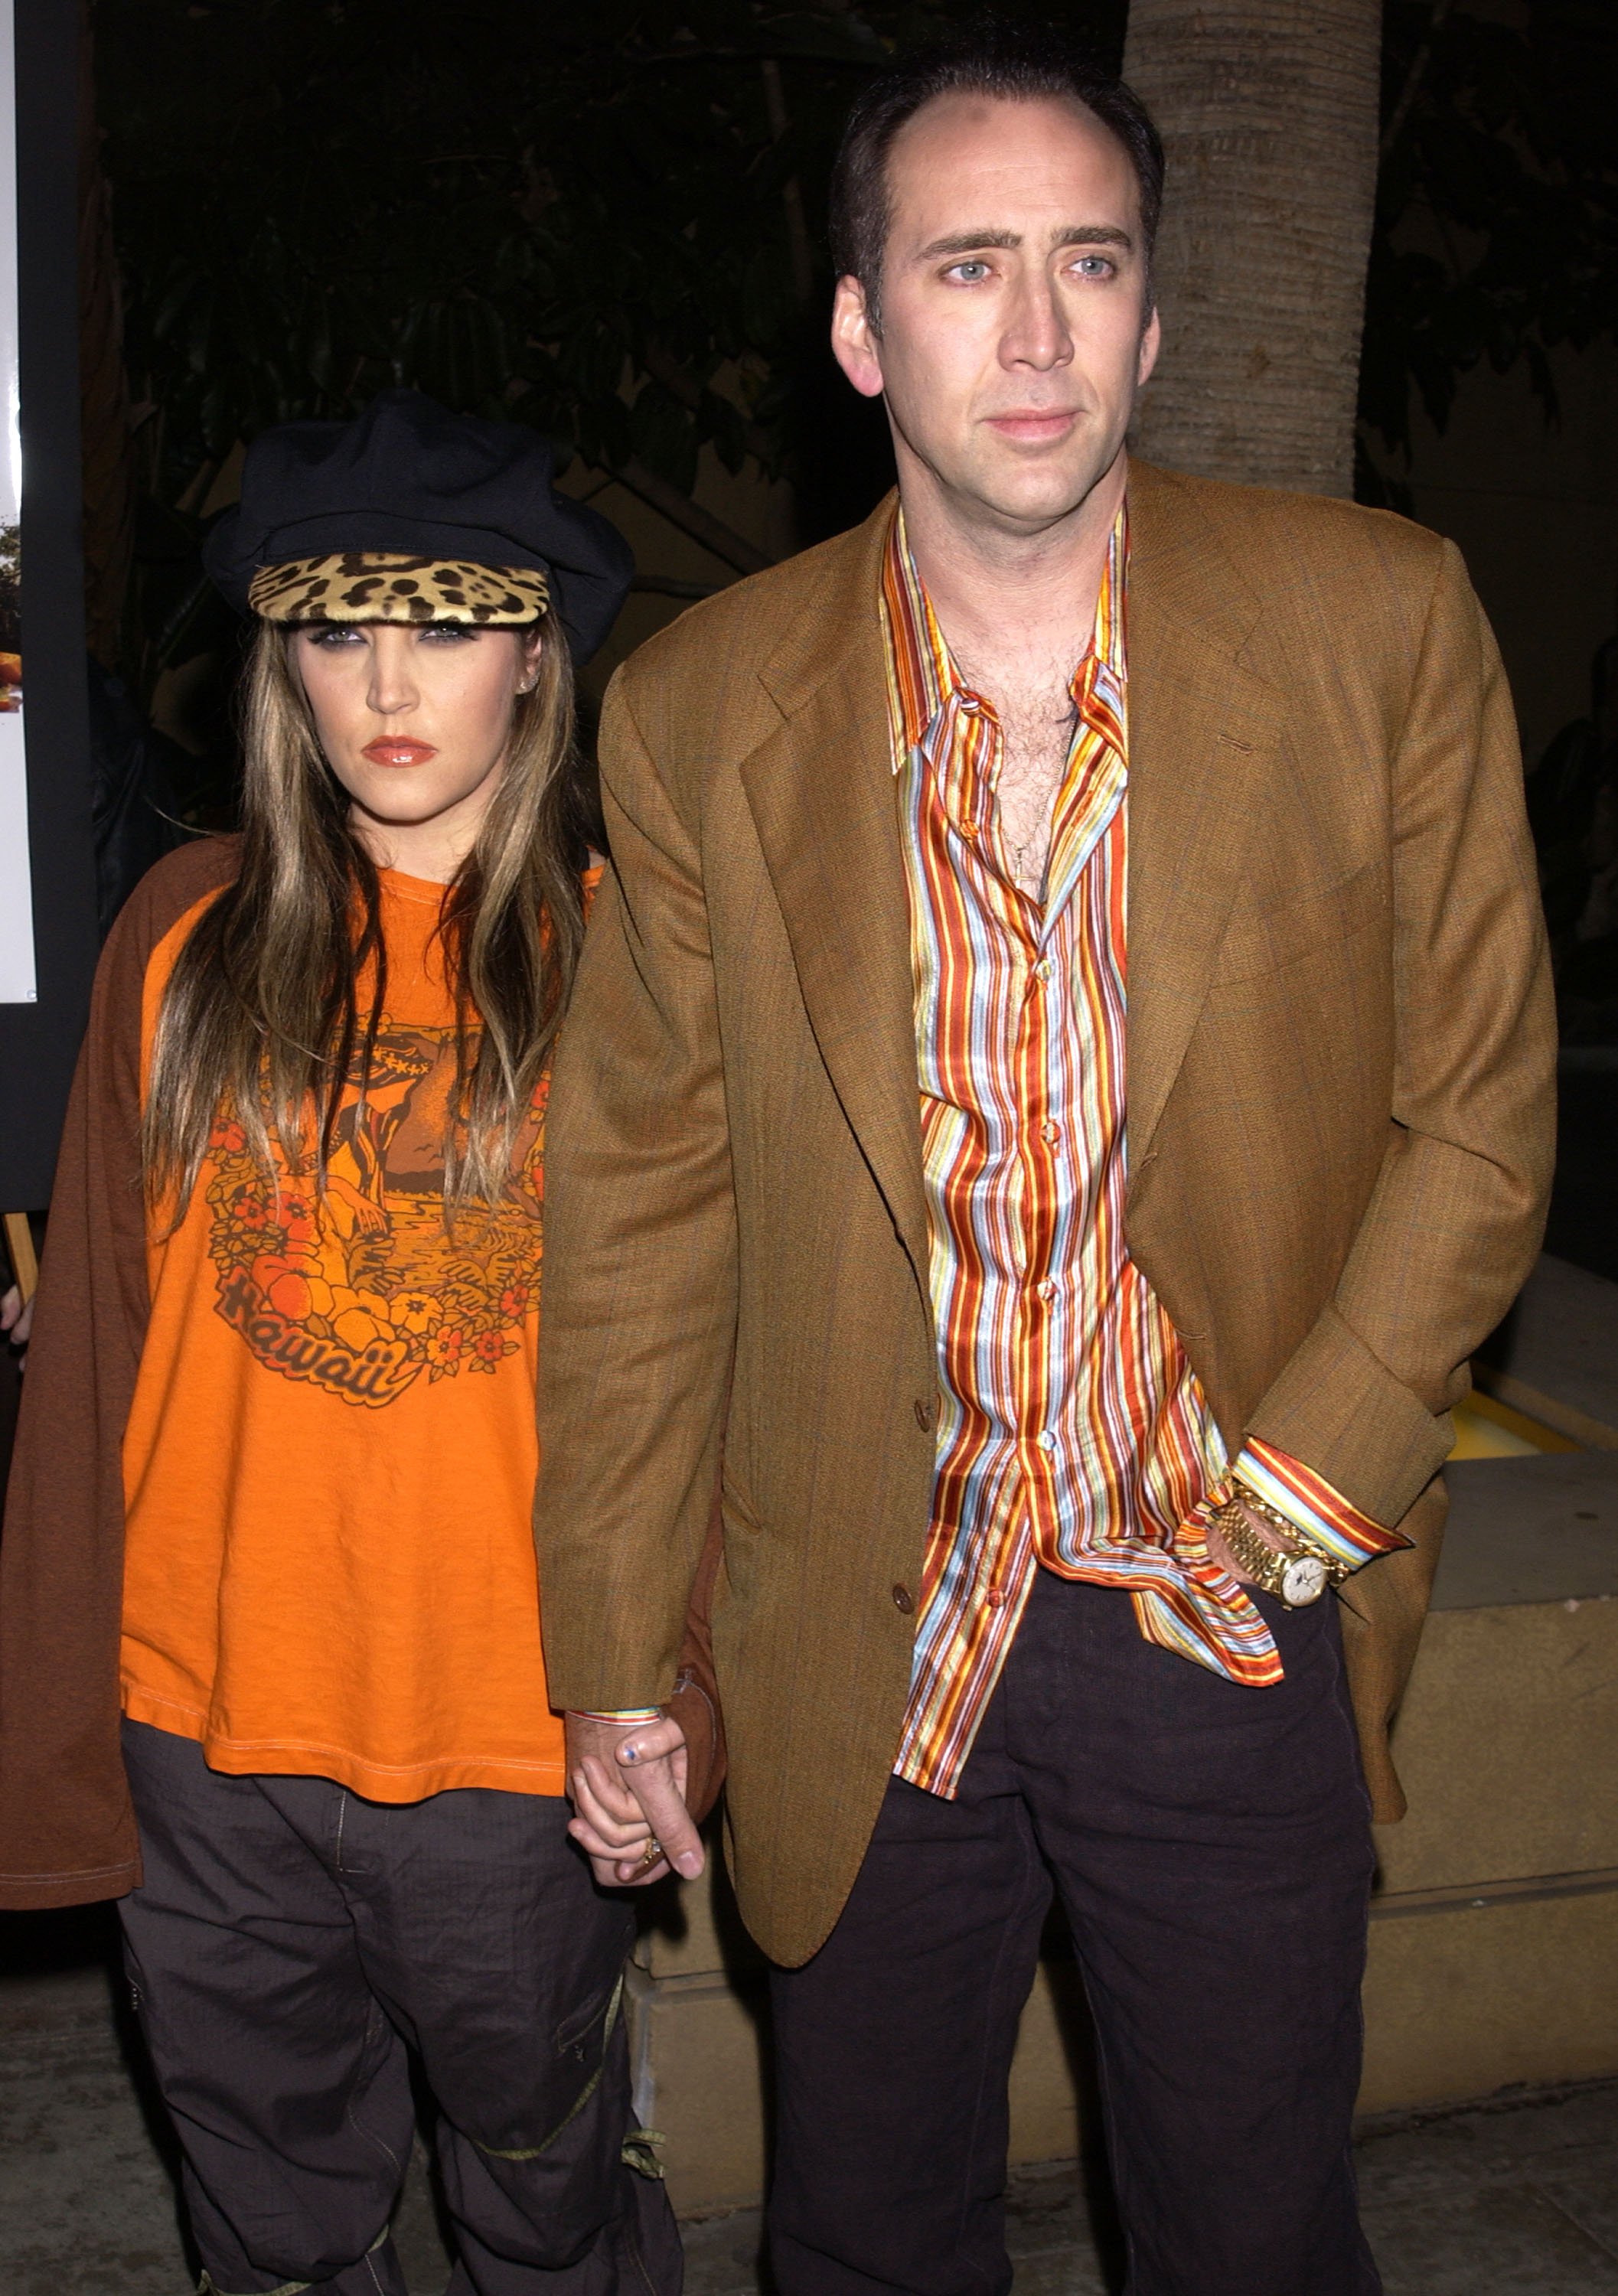 Nicolas Cage and wife Lisa Marie Presley during Screening of "Adaptation" at The Egyptian Theater | Source: Getty Images